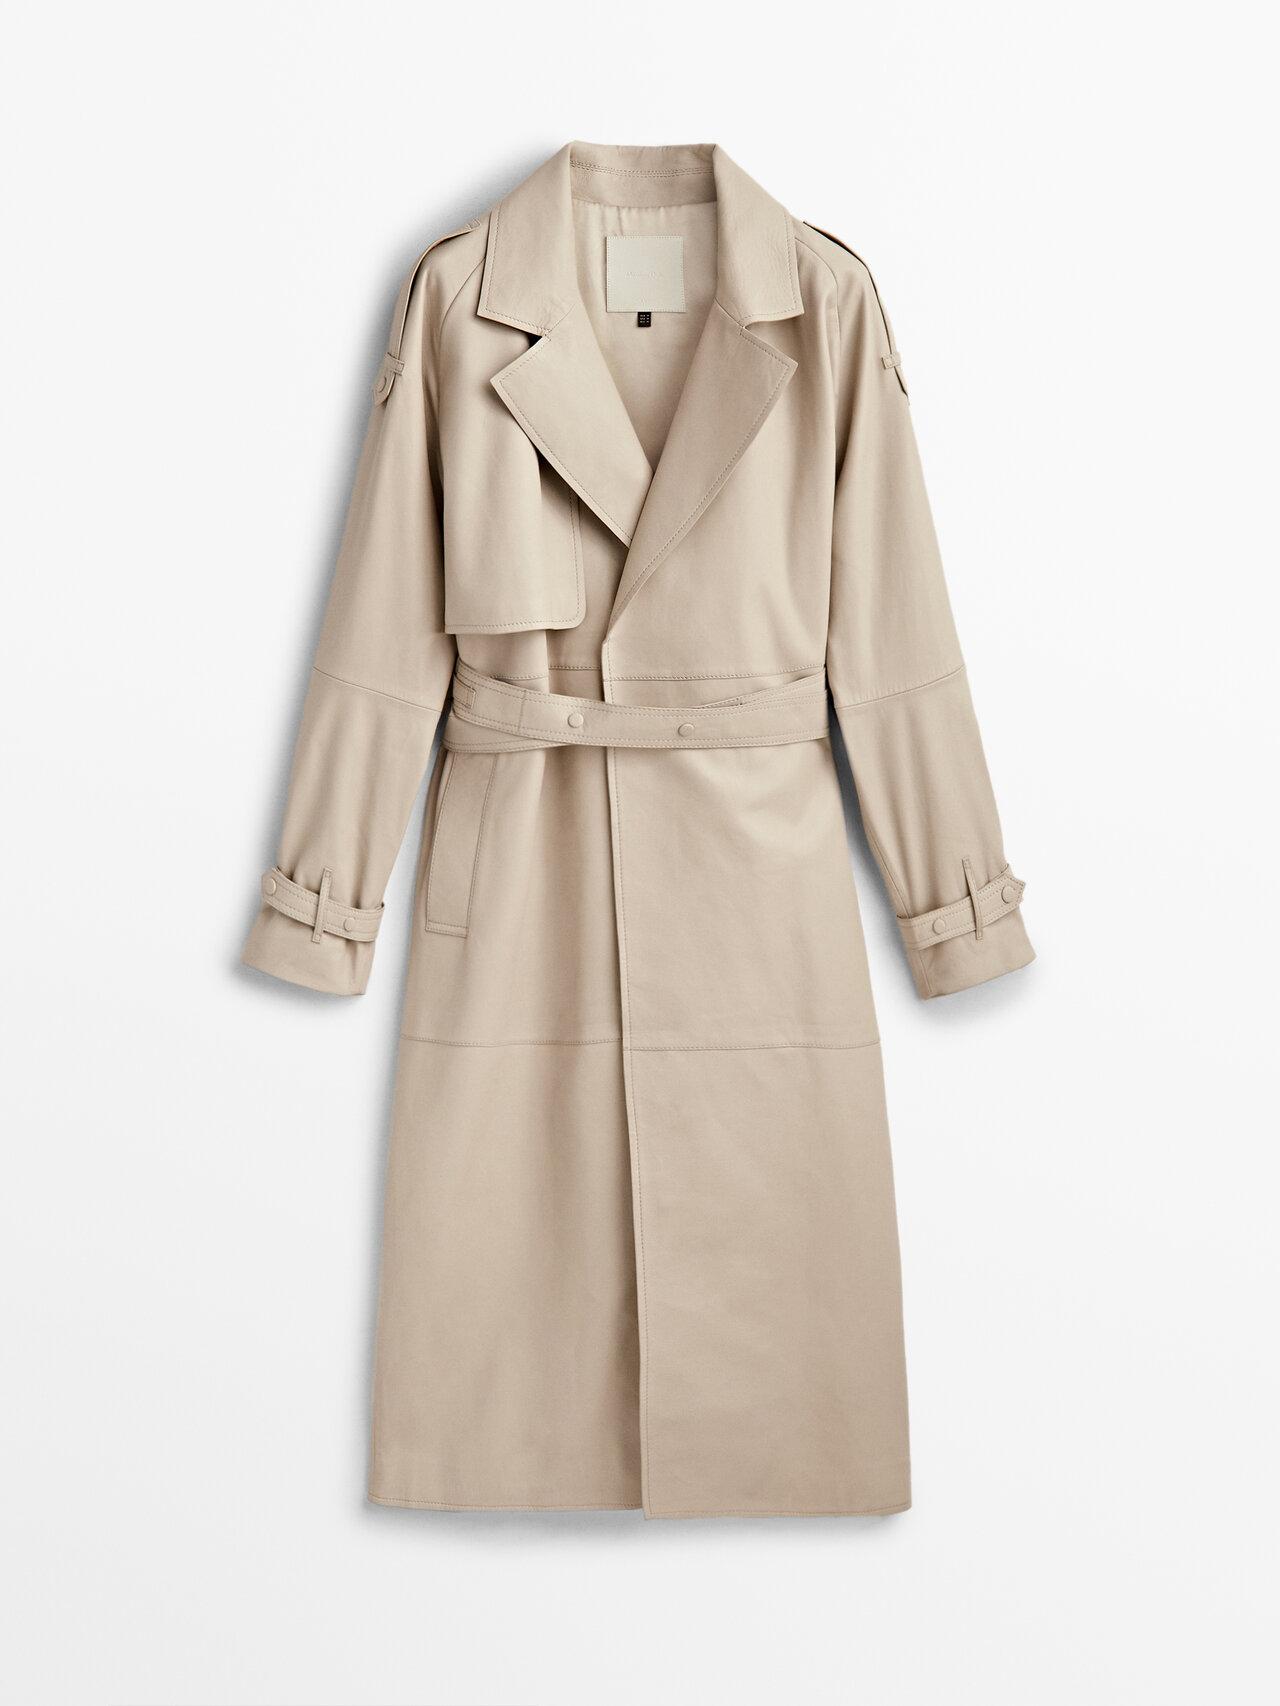 MASSIMO DUTTI Nappa Leather Trench-style Coat With Belt in Natural | Lyst